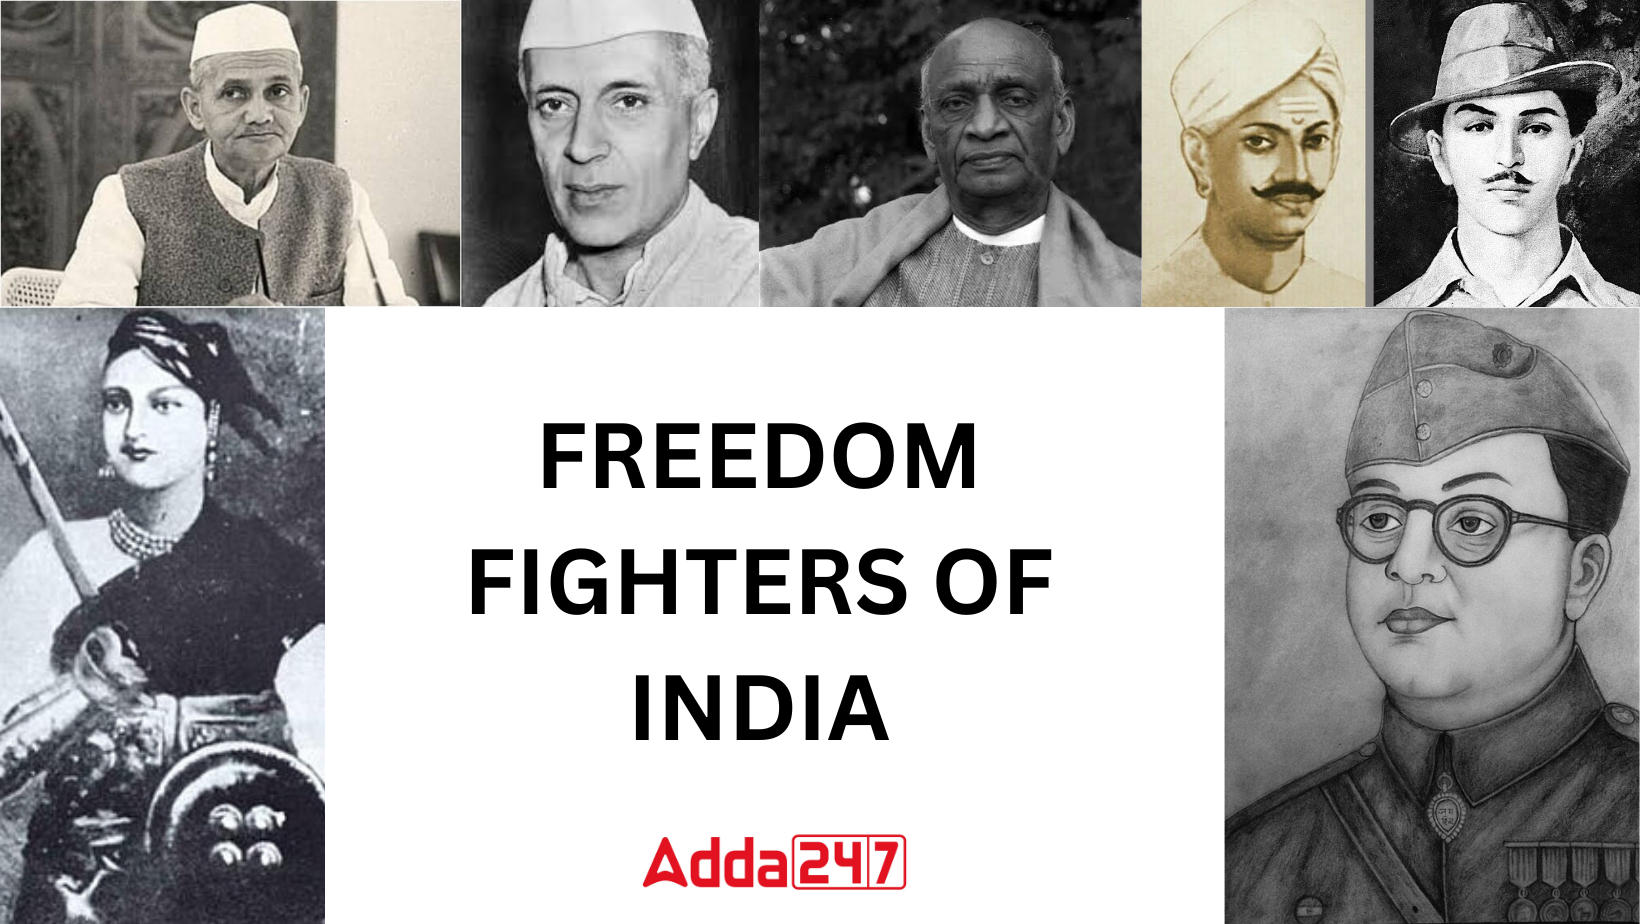 FREEDOM FIGHTERS OF INDIA